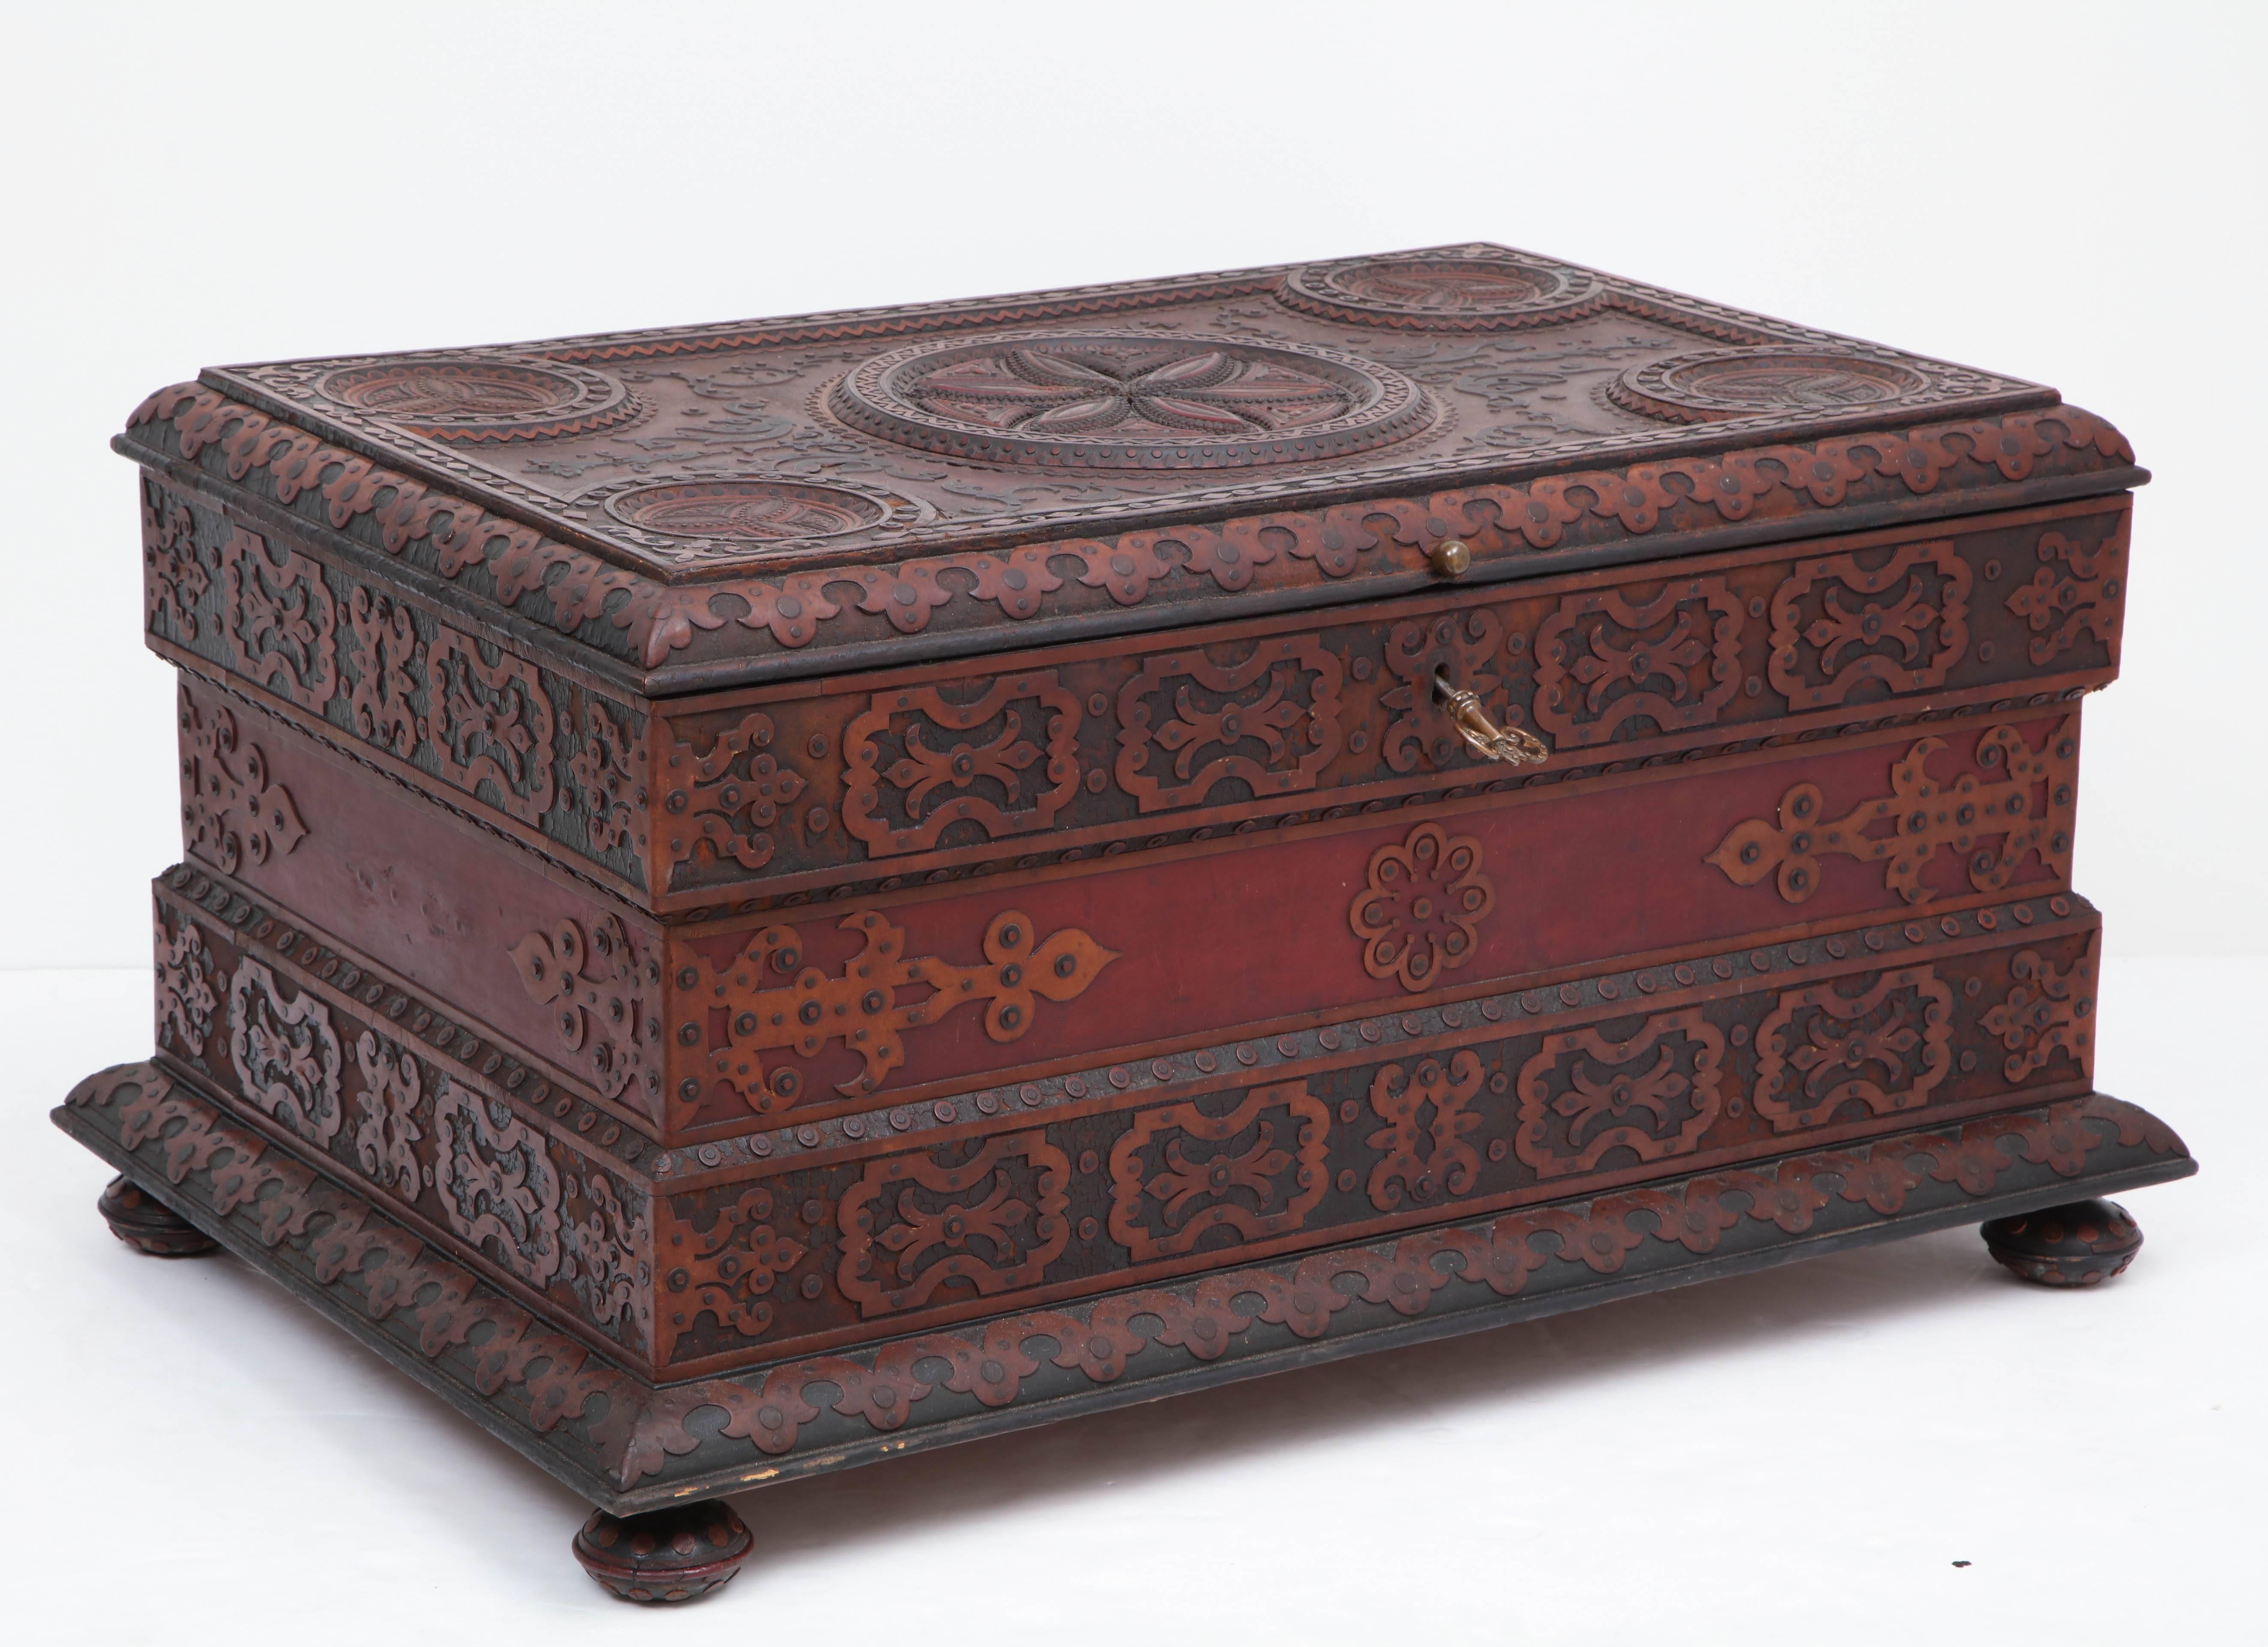 Other Spectacular and Large Tramp Art Blanket Box, circa 1890-1910